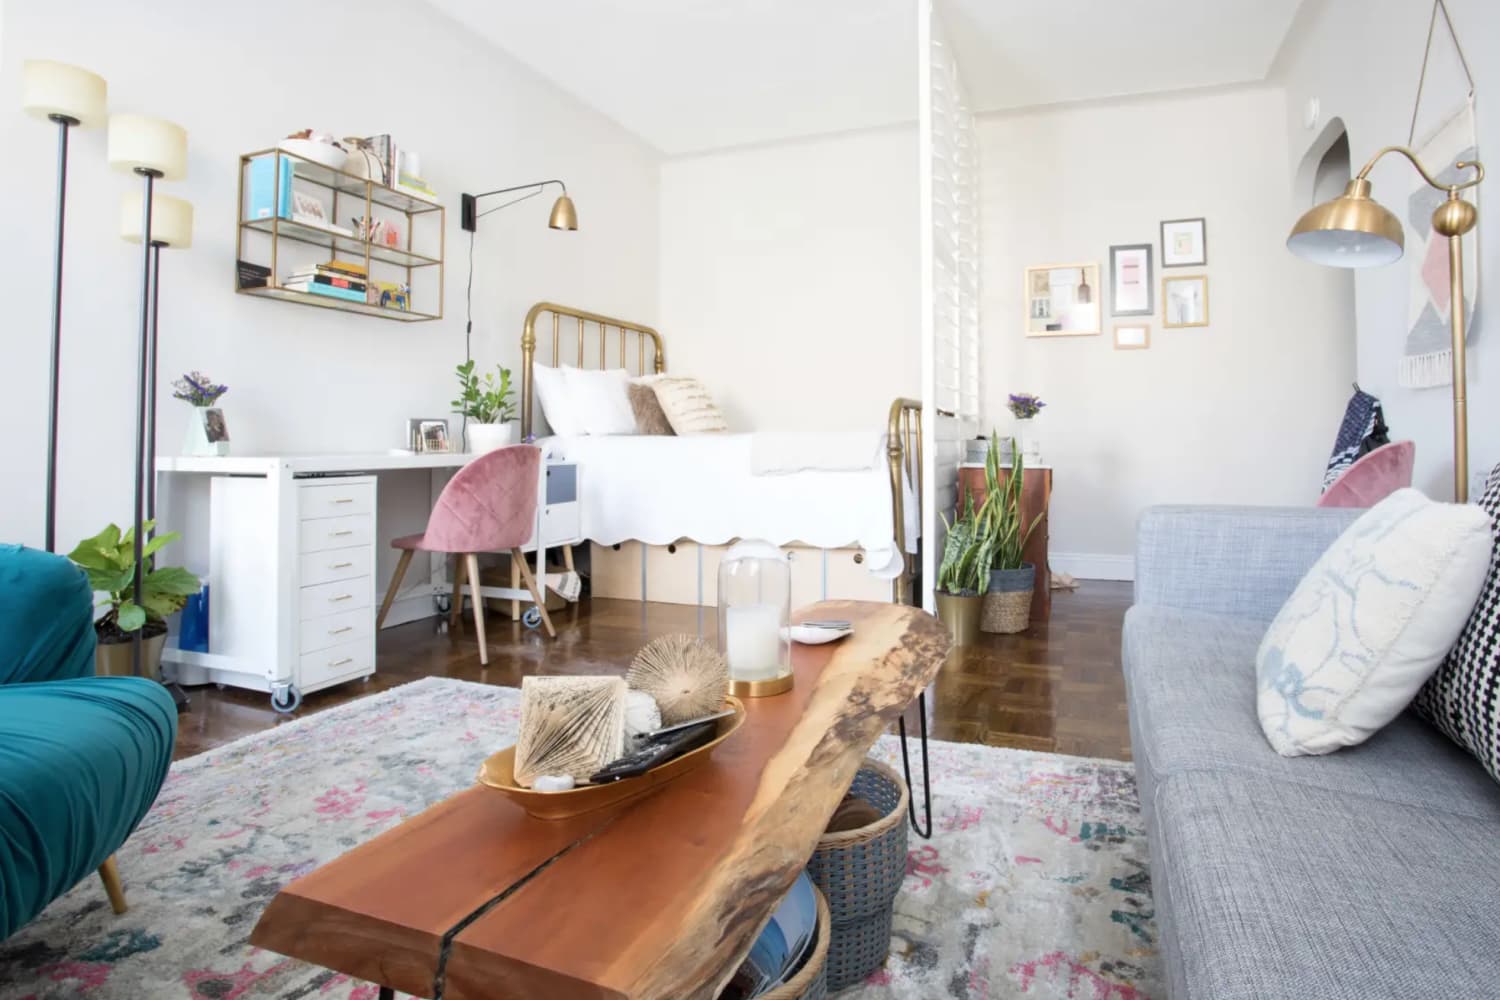 How To Make The Most Out Of Your Studio Apartment | Apartment Therapy